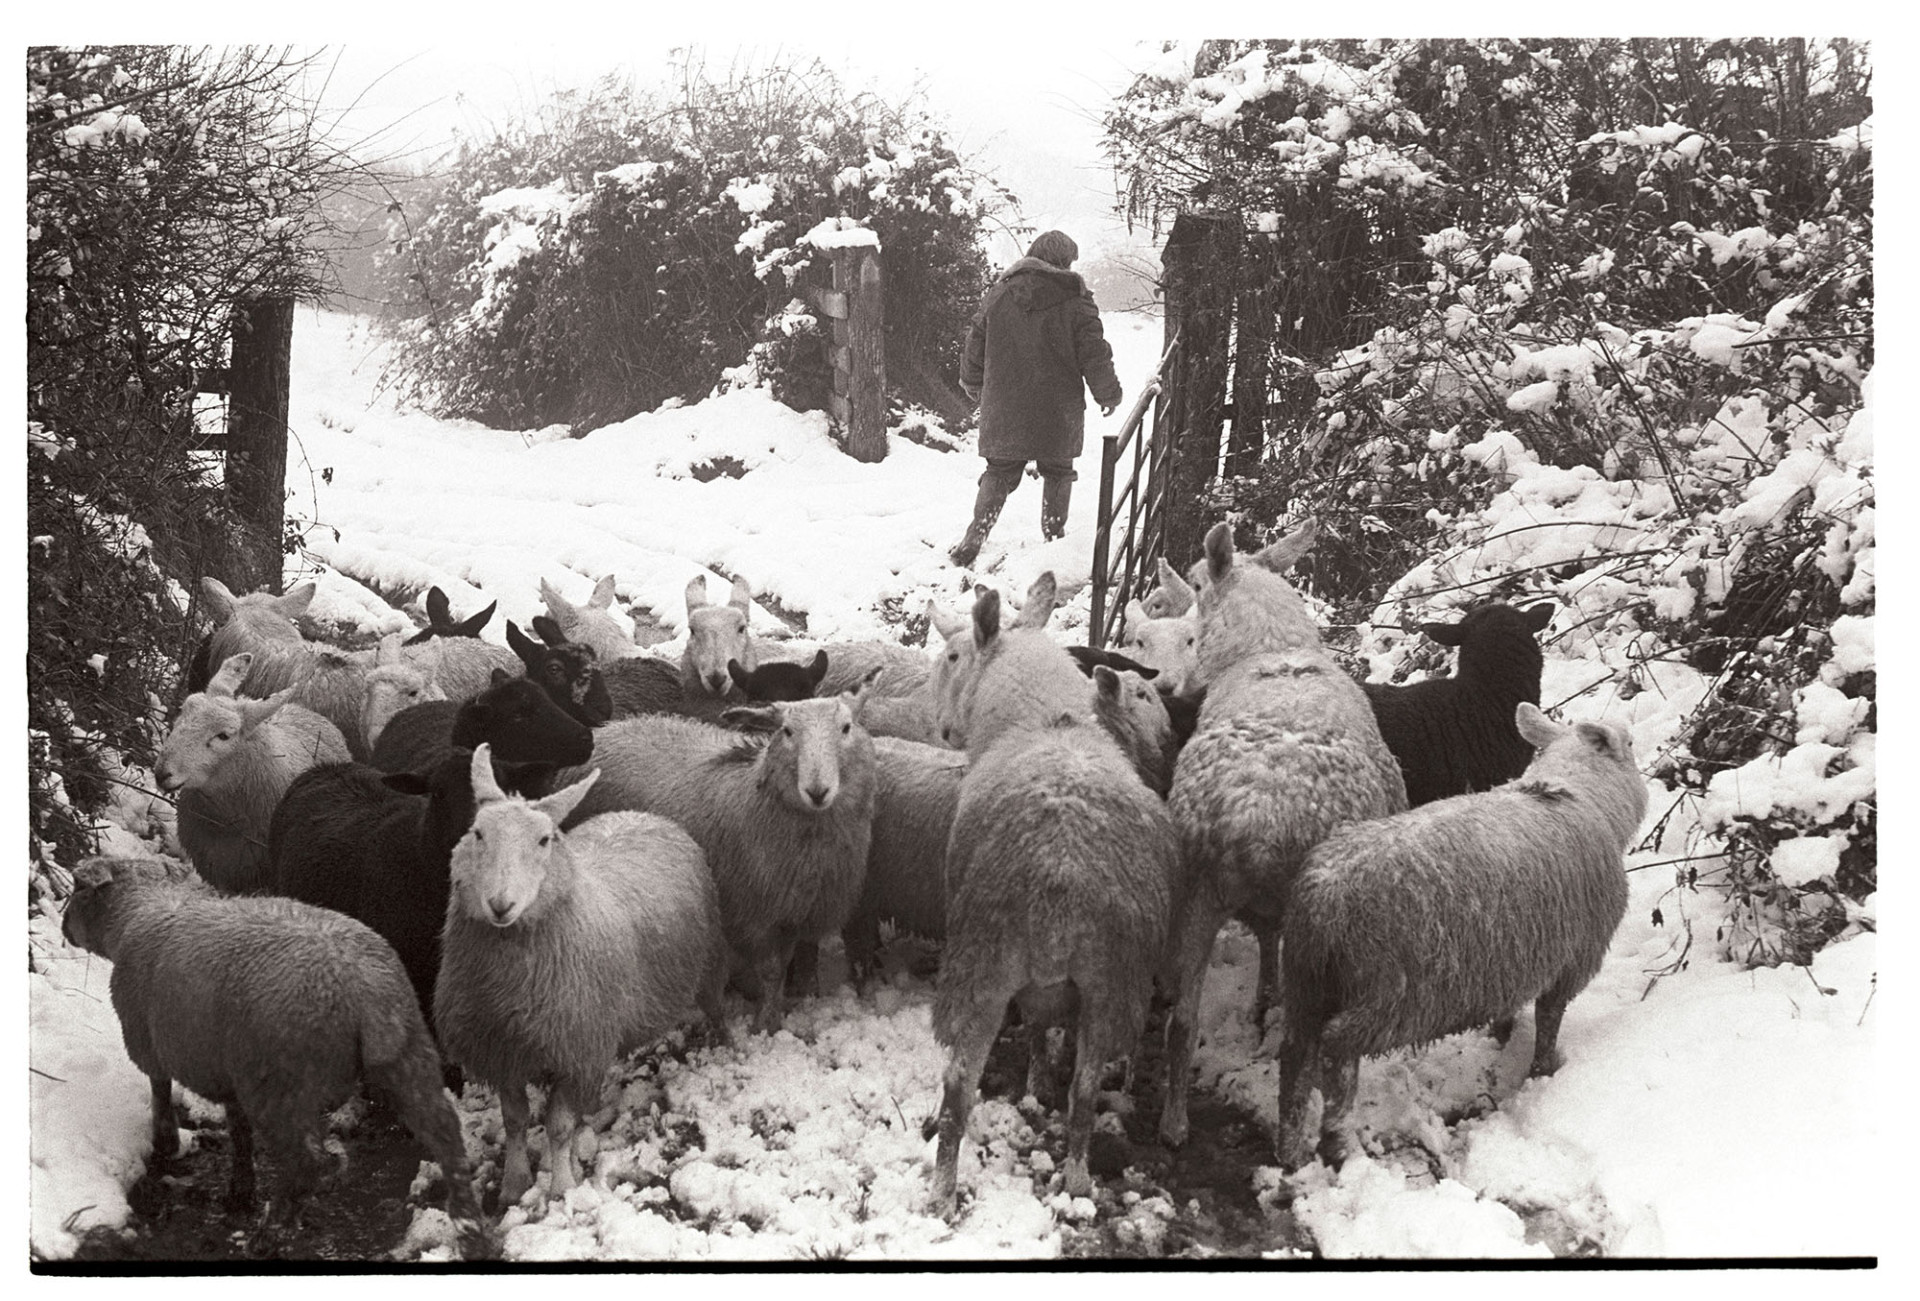 Snow, woman farmer and sheep, hedge and gate. 
[Mrs Jones walking into a snow covered field at Upcott, Dolton. A small flock of sheep are waiting by an open field gate in the snow.]